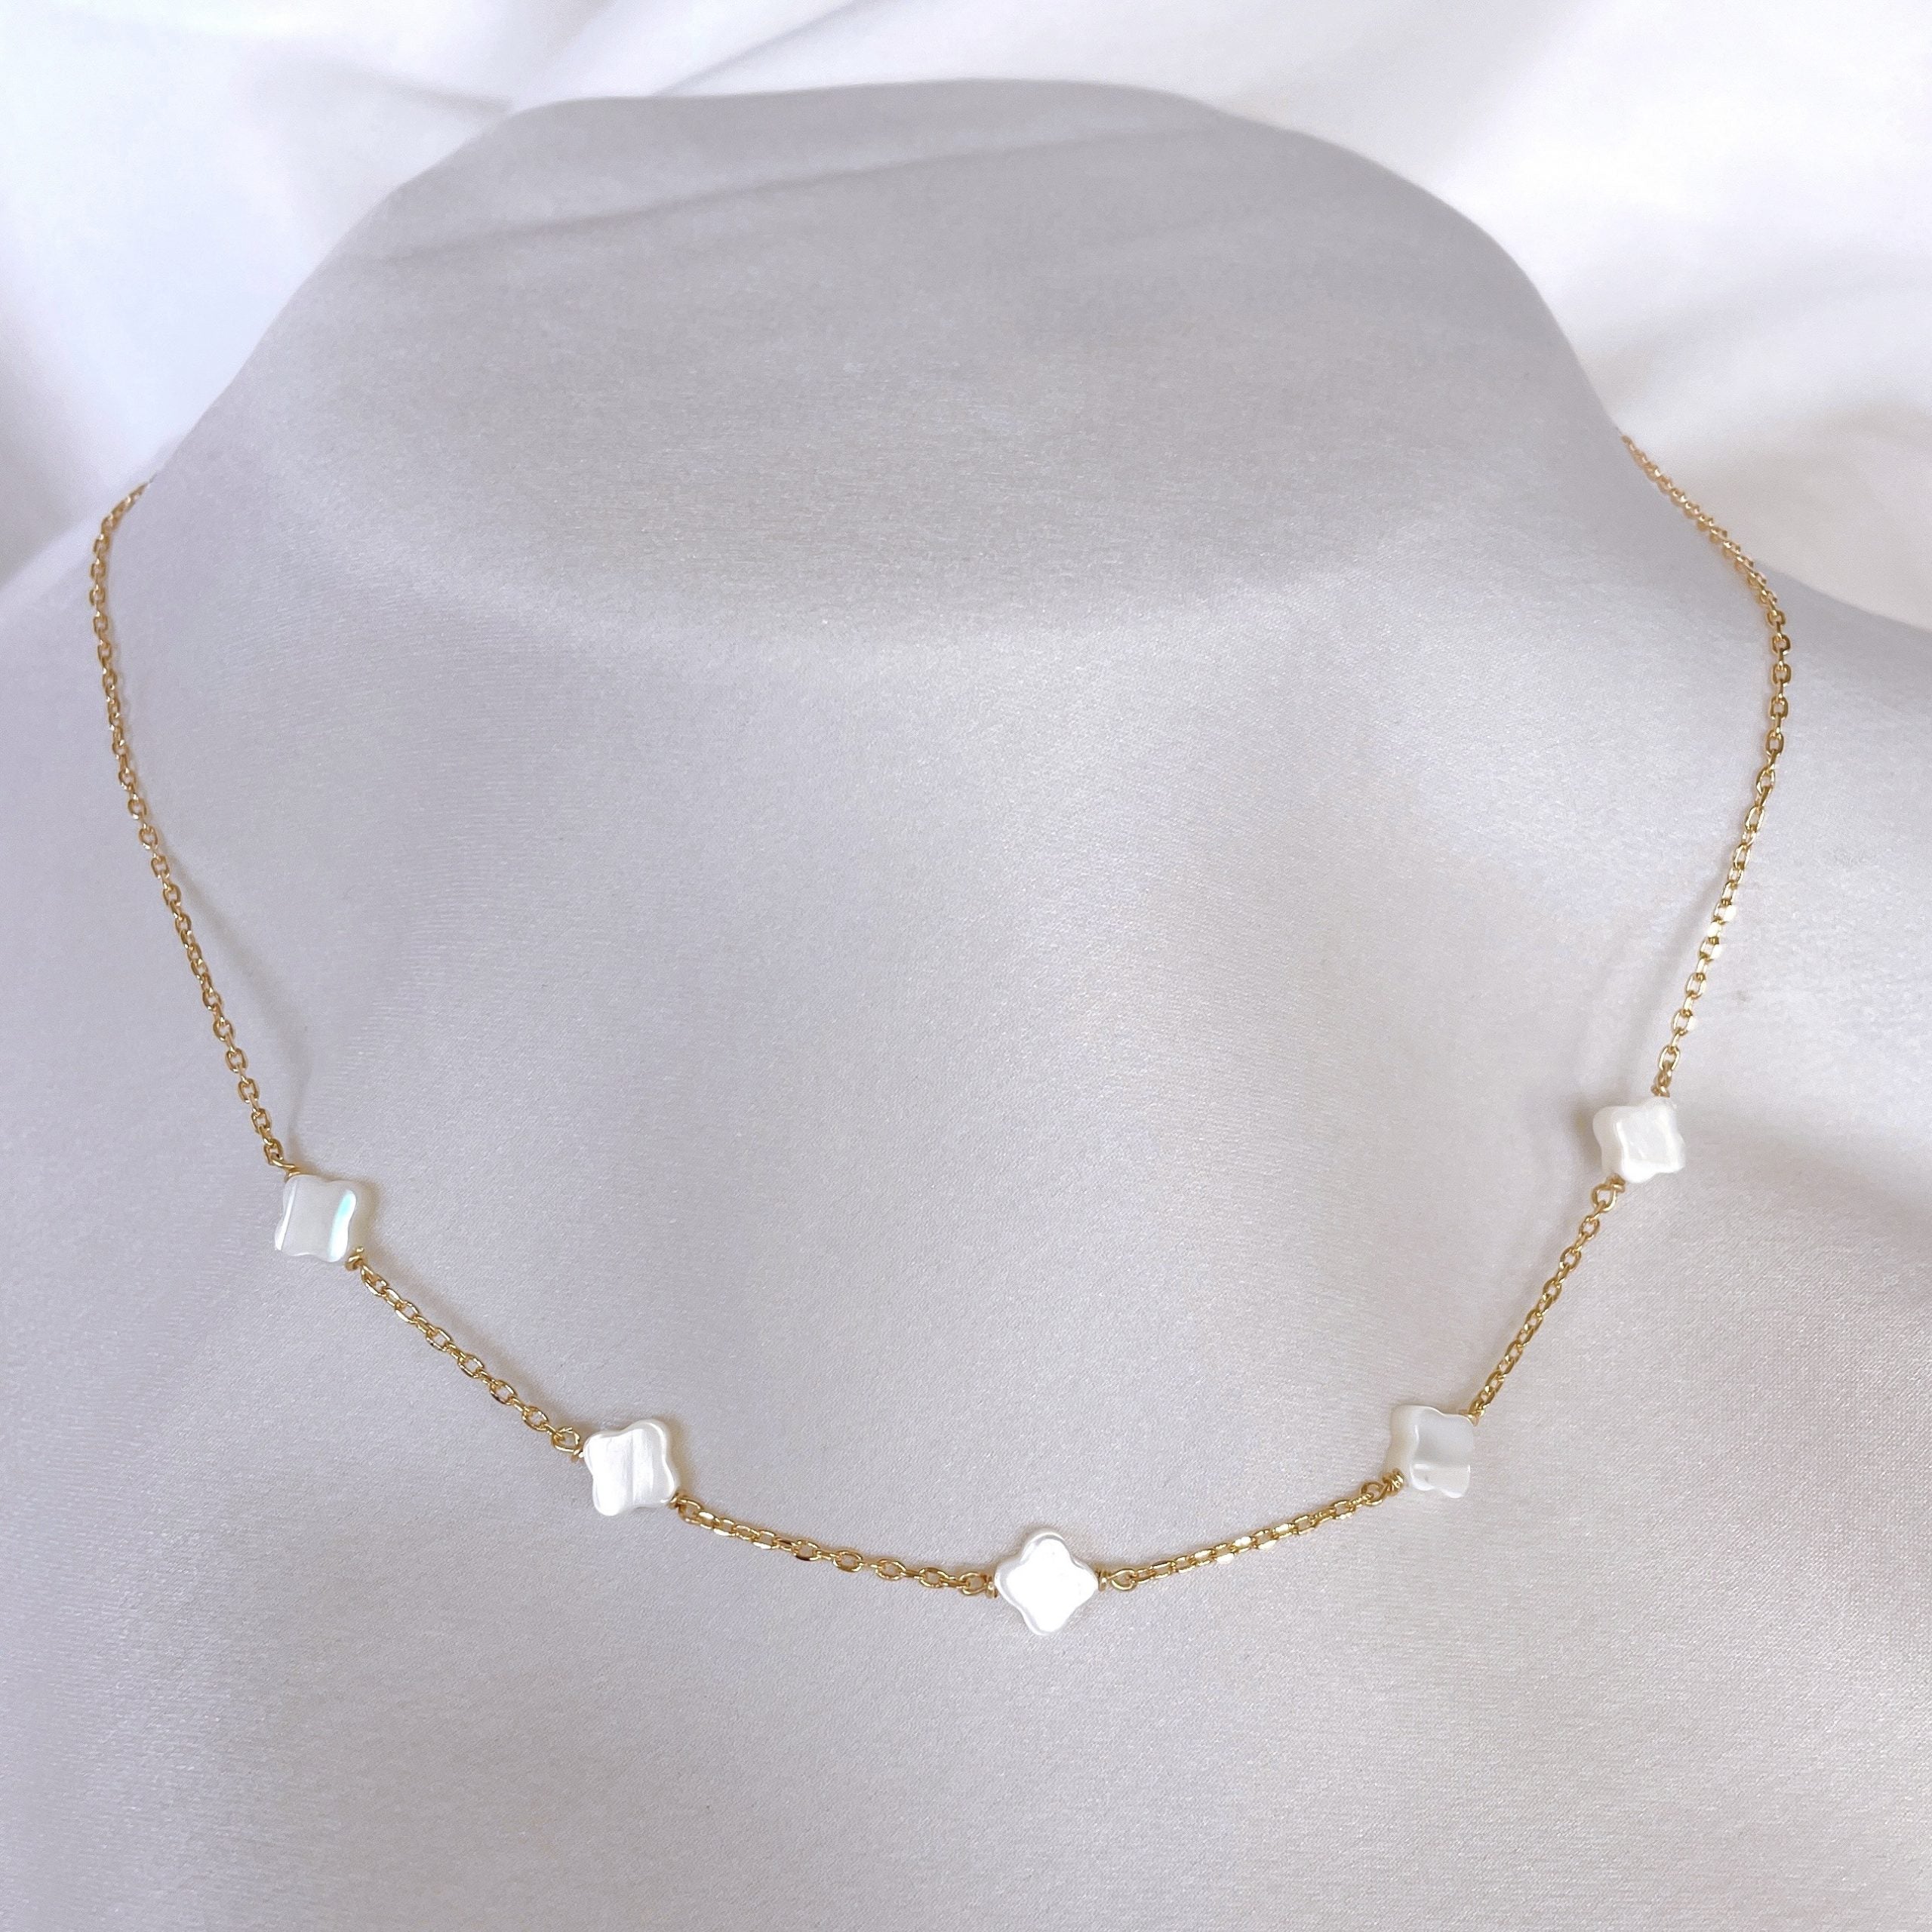 Gold-plated “Bianca” necklace